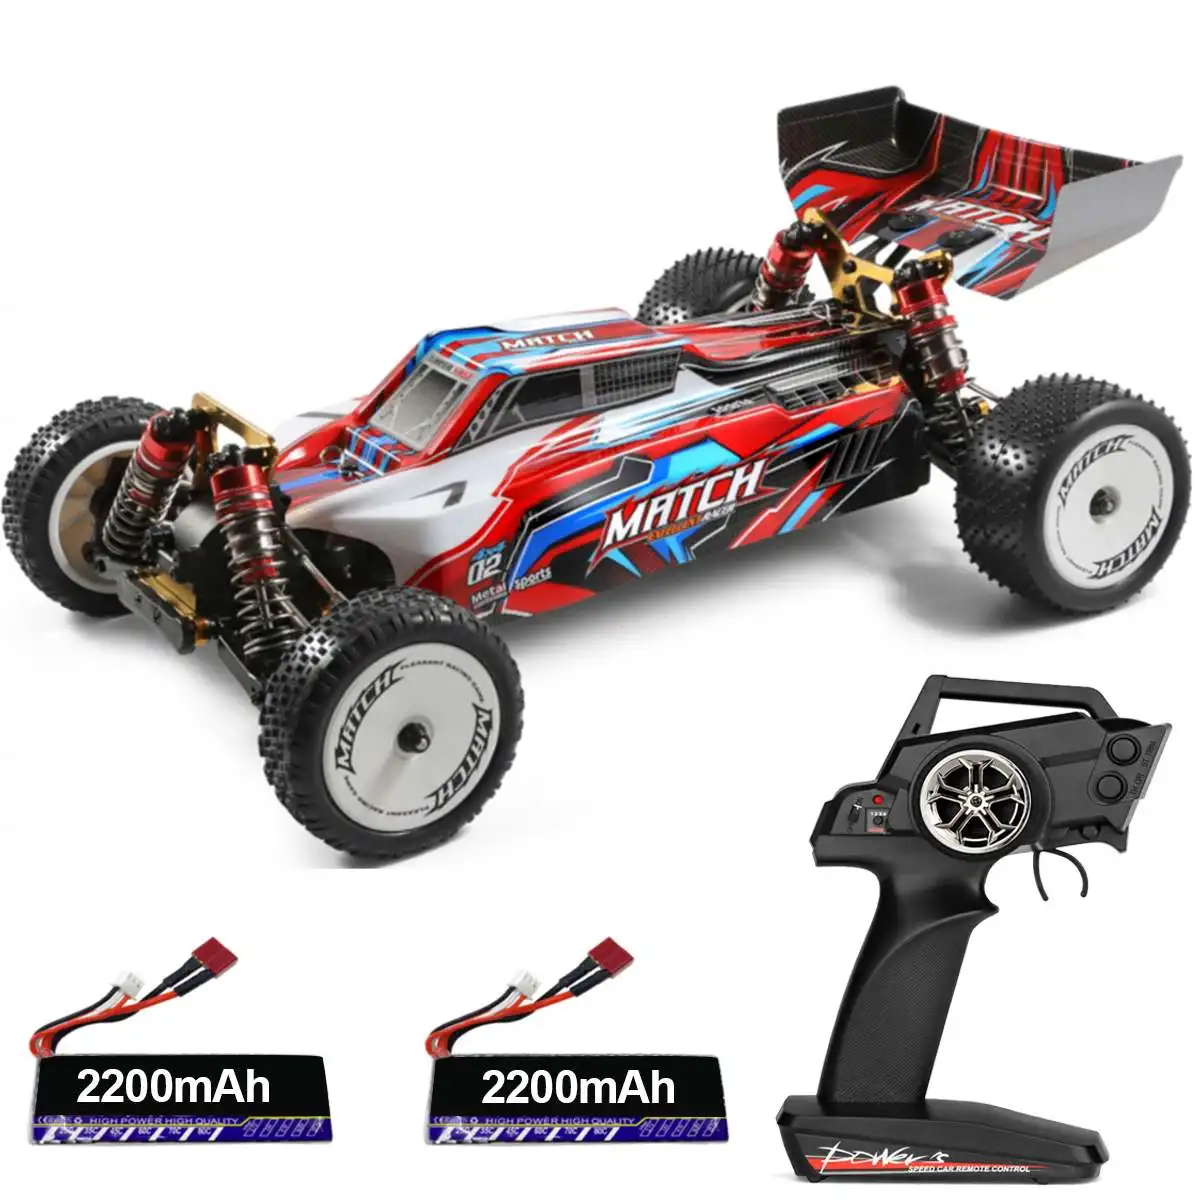 

1:12 Remote Control Car 2.4GHz All-Terrain 45Km/h Off-Road RC Car Monster Truck Toy with Battery for Boys Kid Christmas Gift